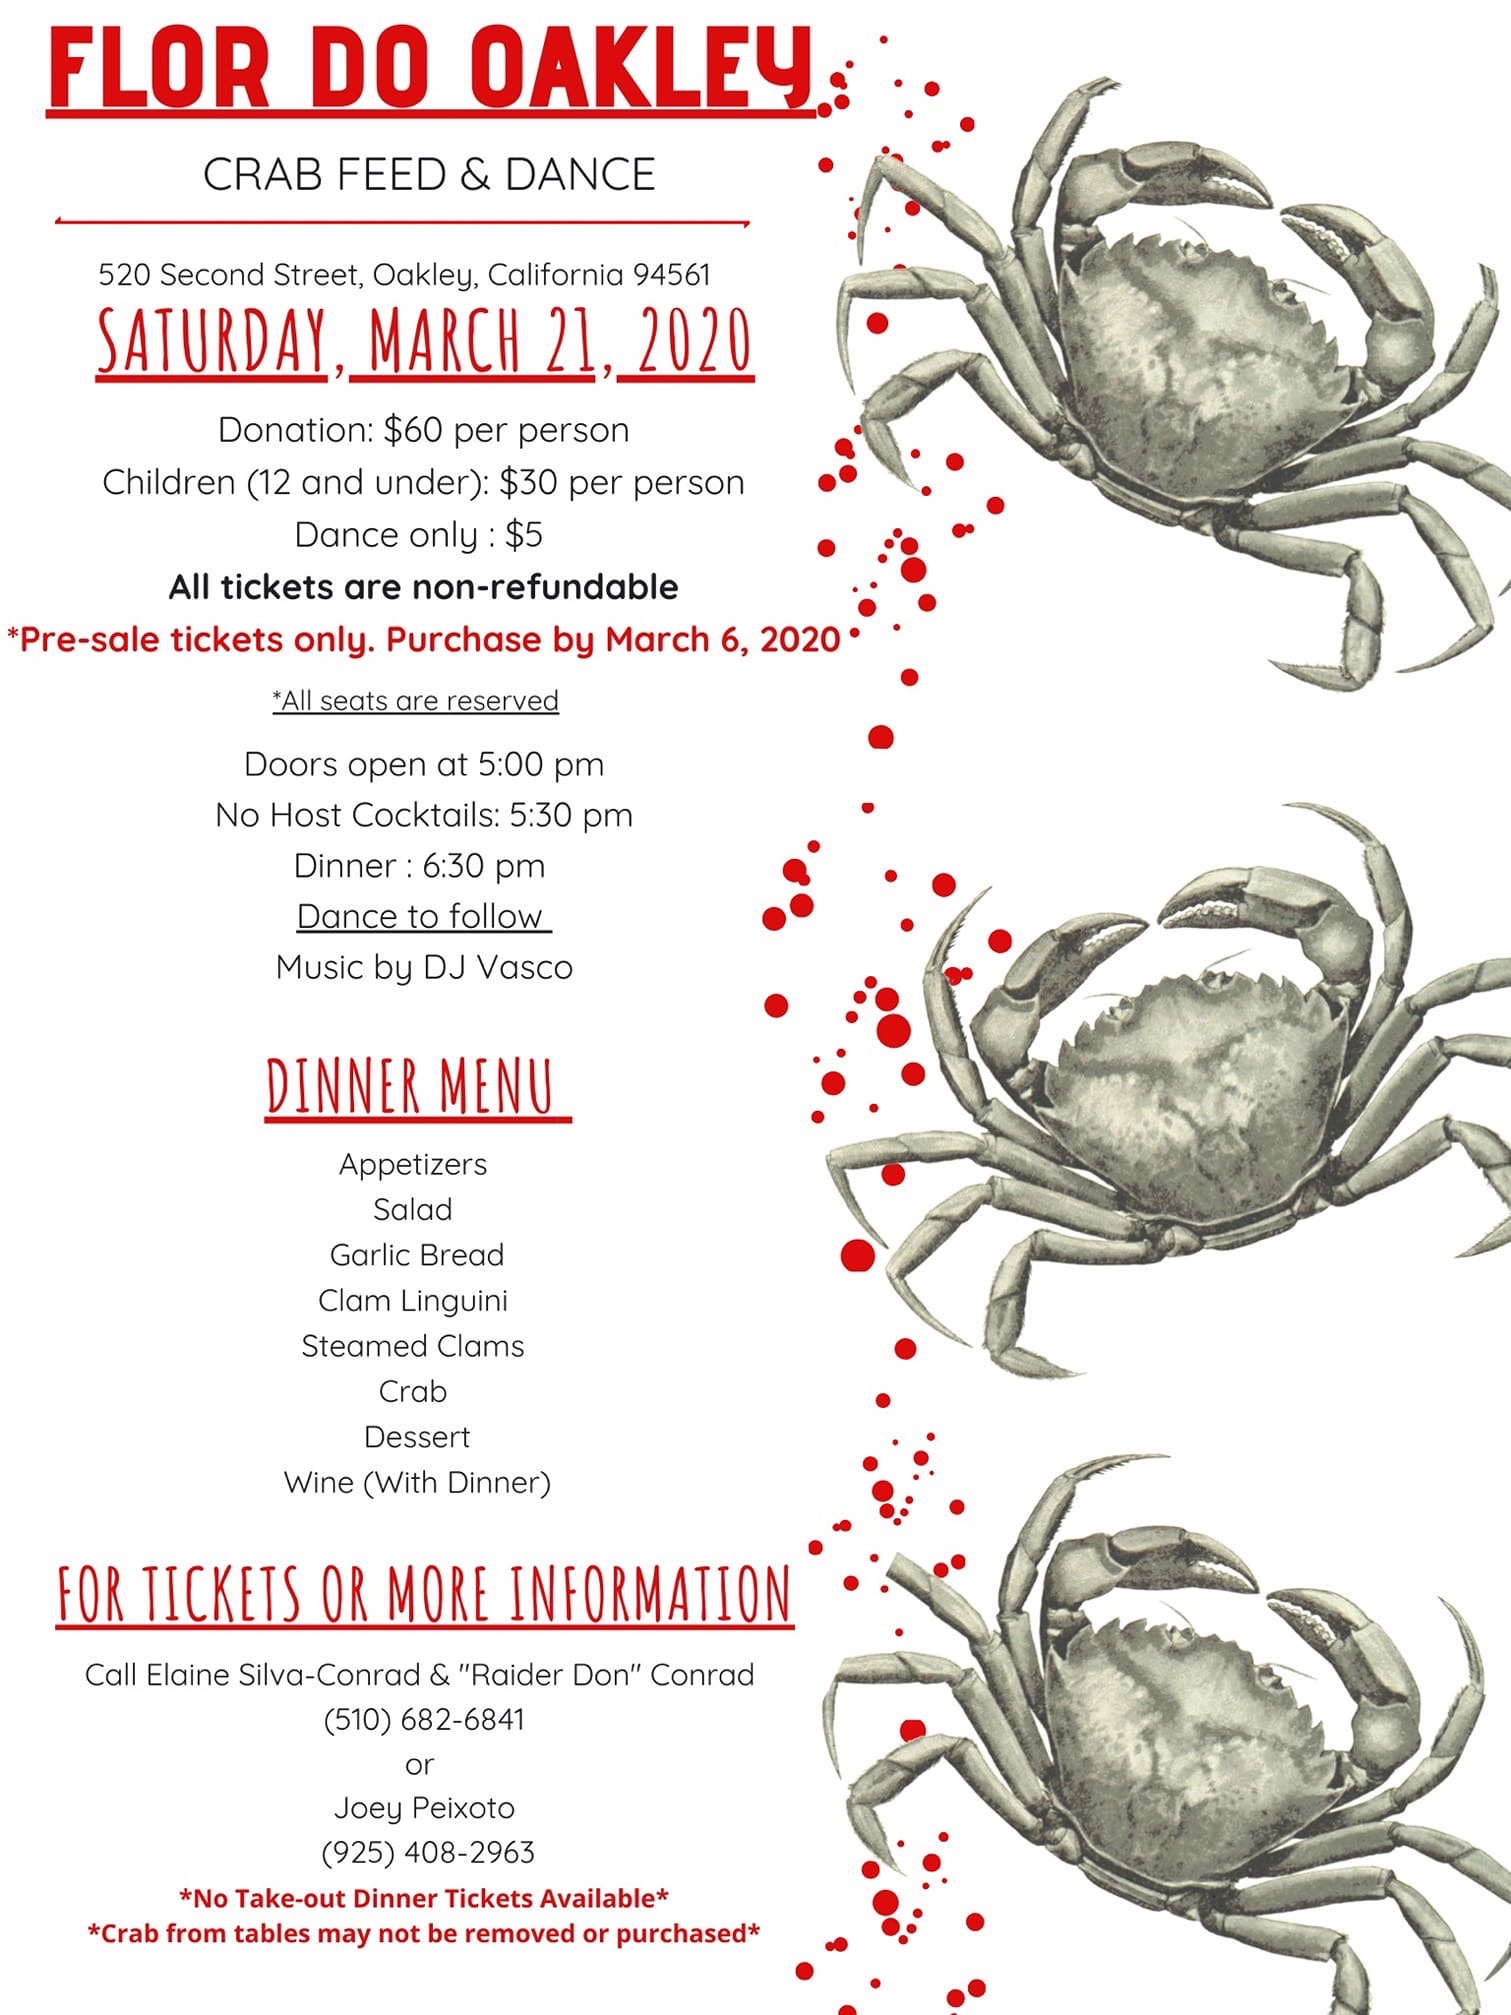 Flor Do Oakley crab feed and dance fundraiser, March 21